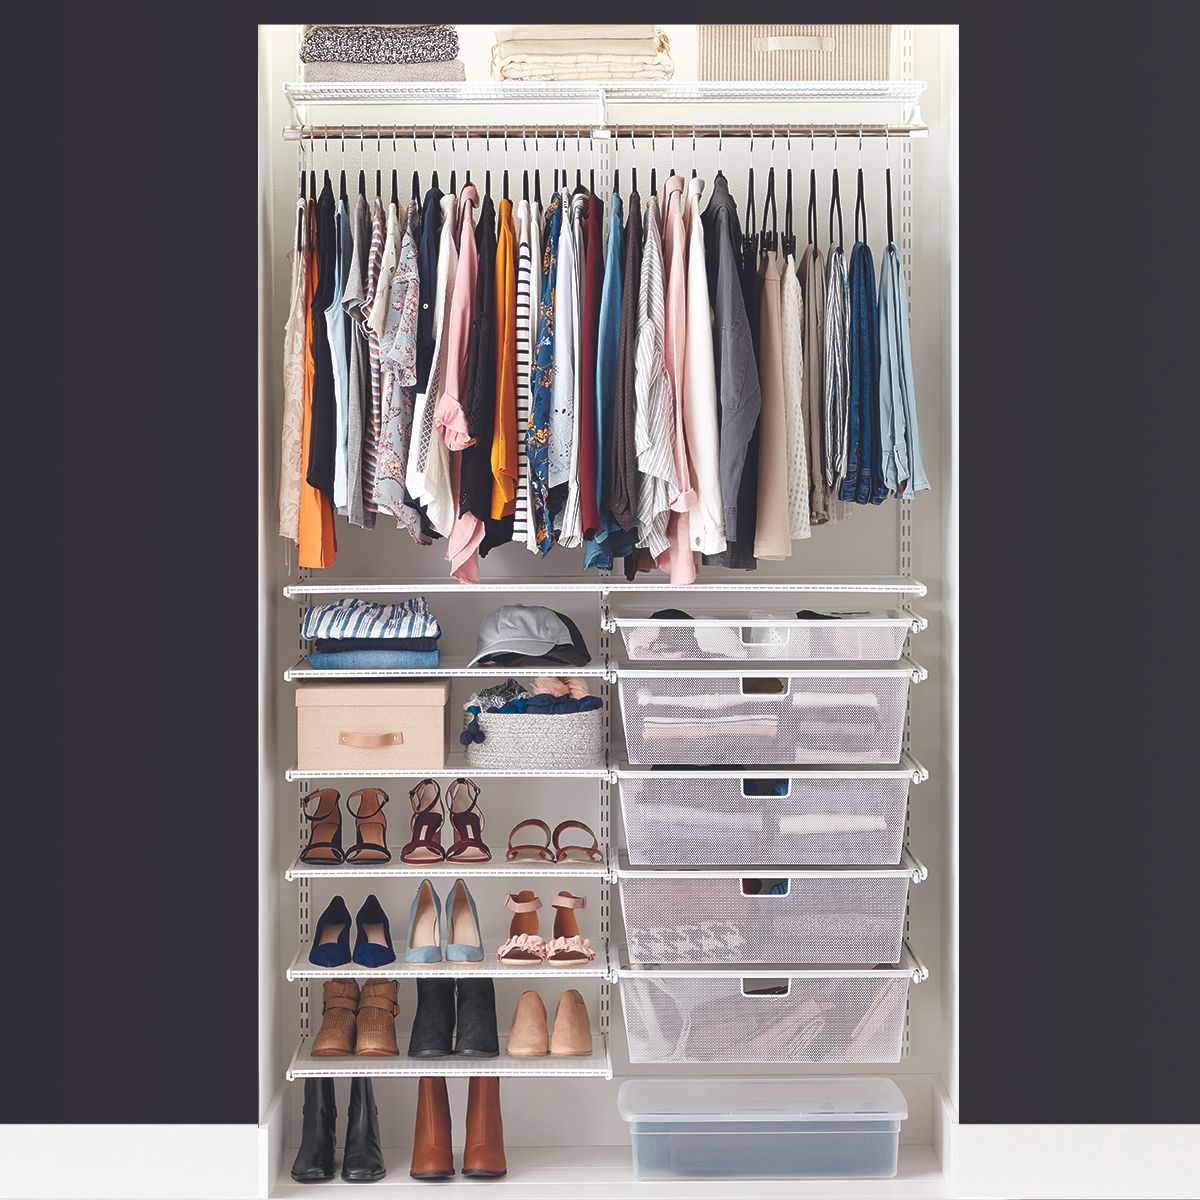 Elfa Classic 4' White Reach-In Clothes Closet | The Container Store